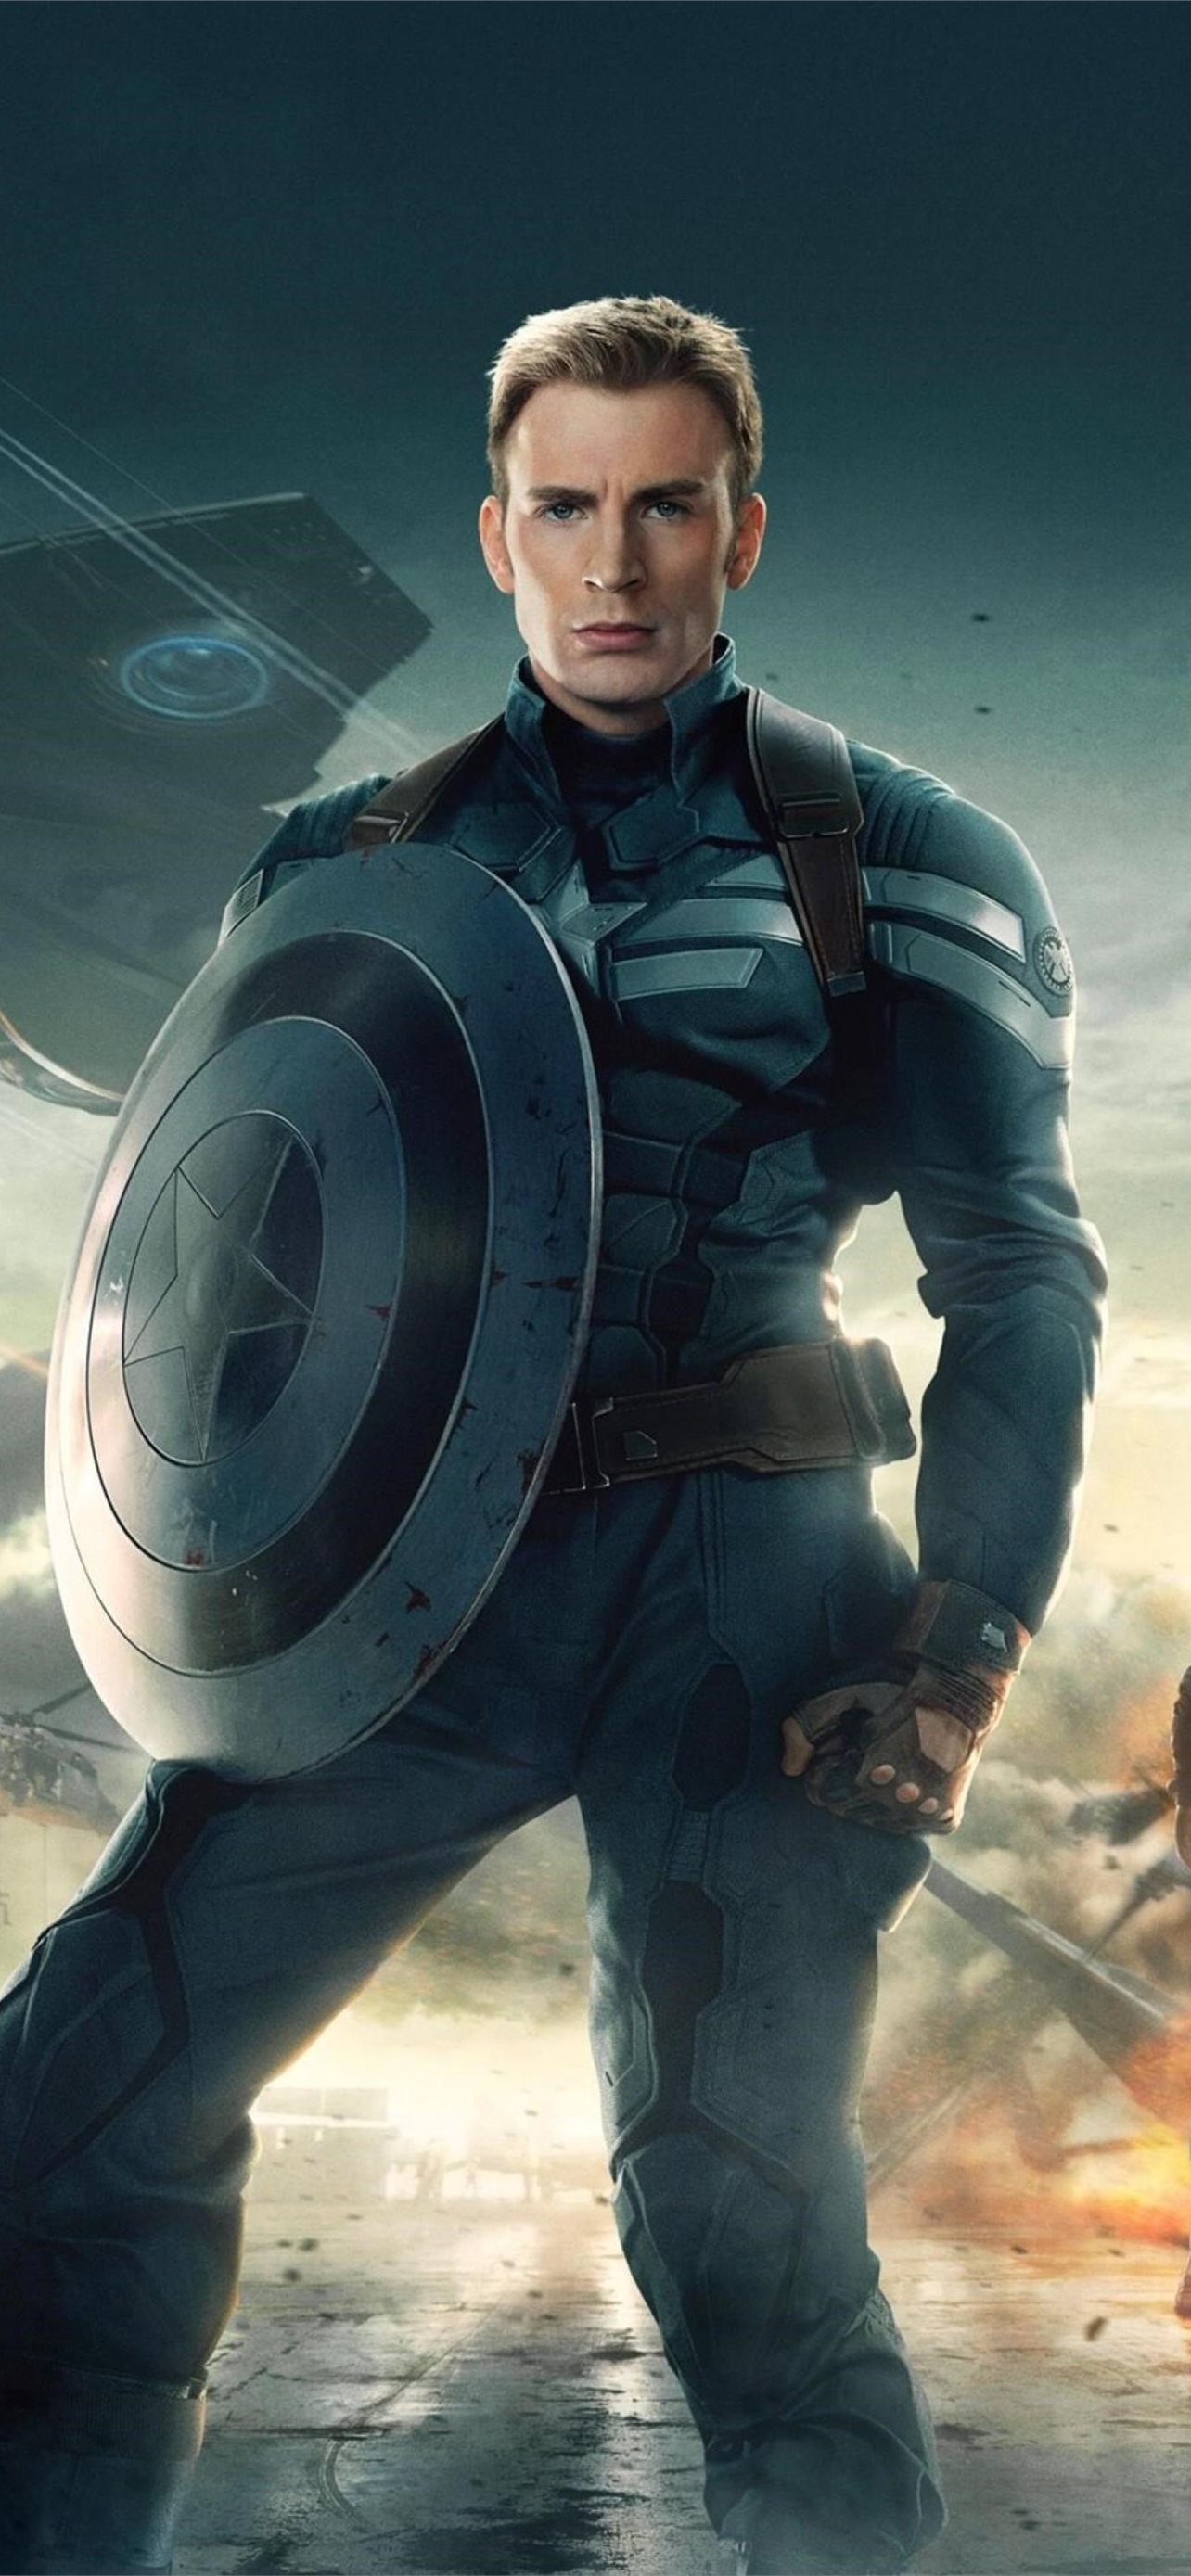 Winter Soldier, Captain America, iPhone wallpapers, Free download, 1290x2780 HD Phone